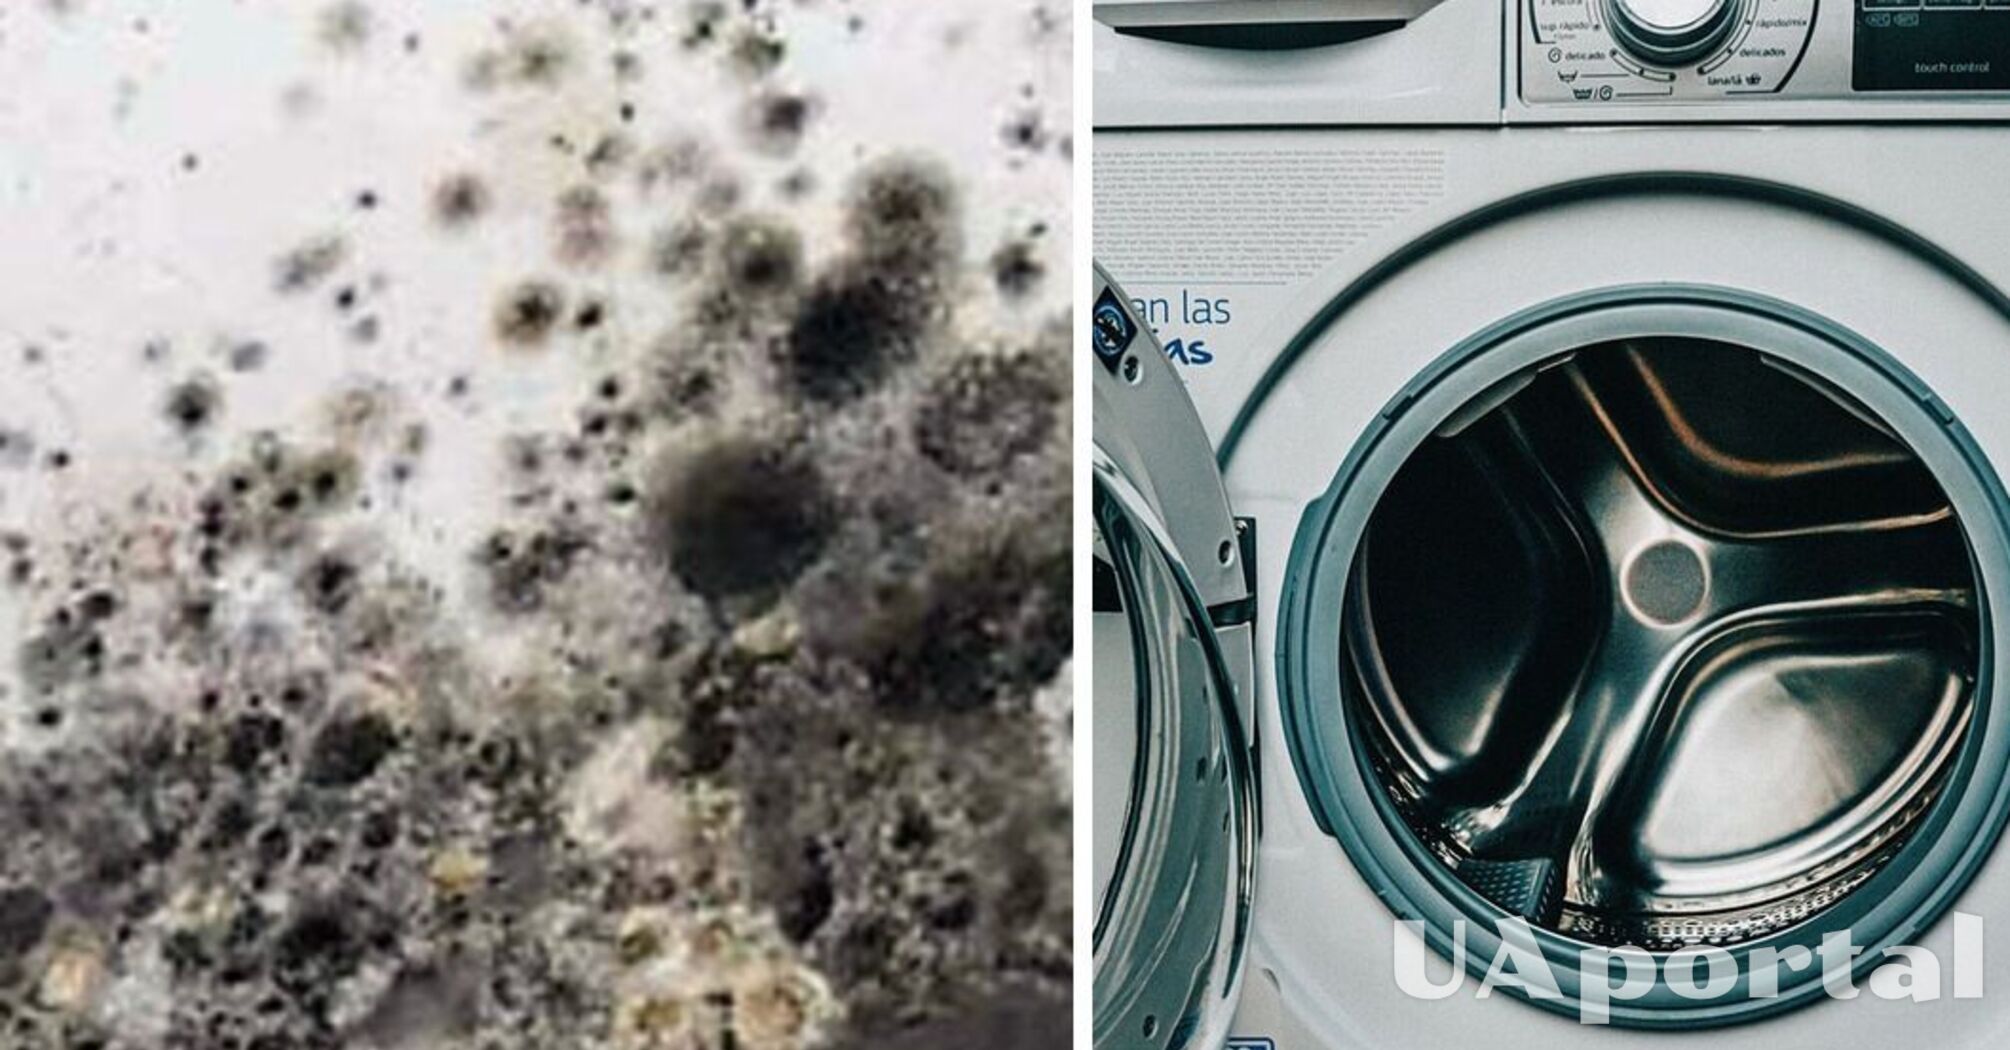 An affordable product to help get rid of mold in your washing machine